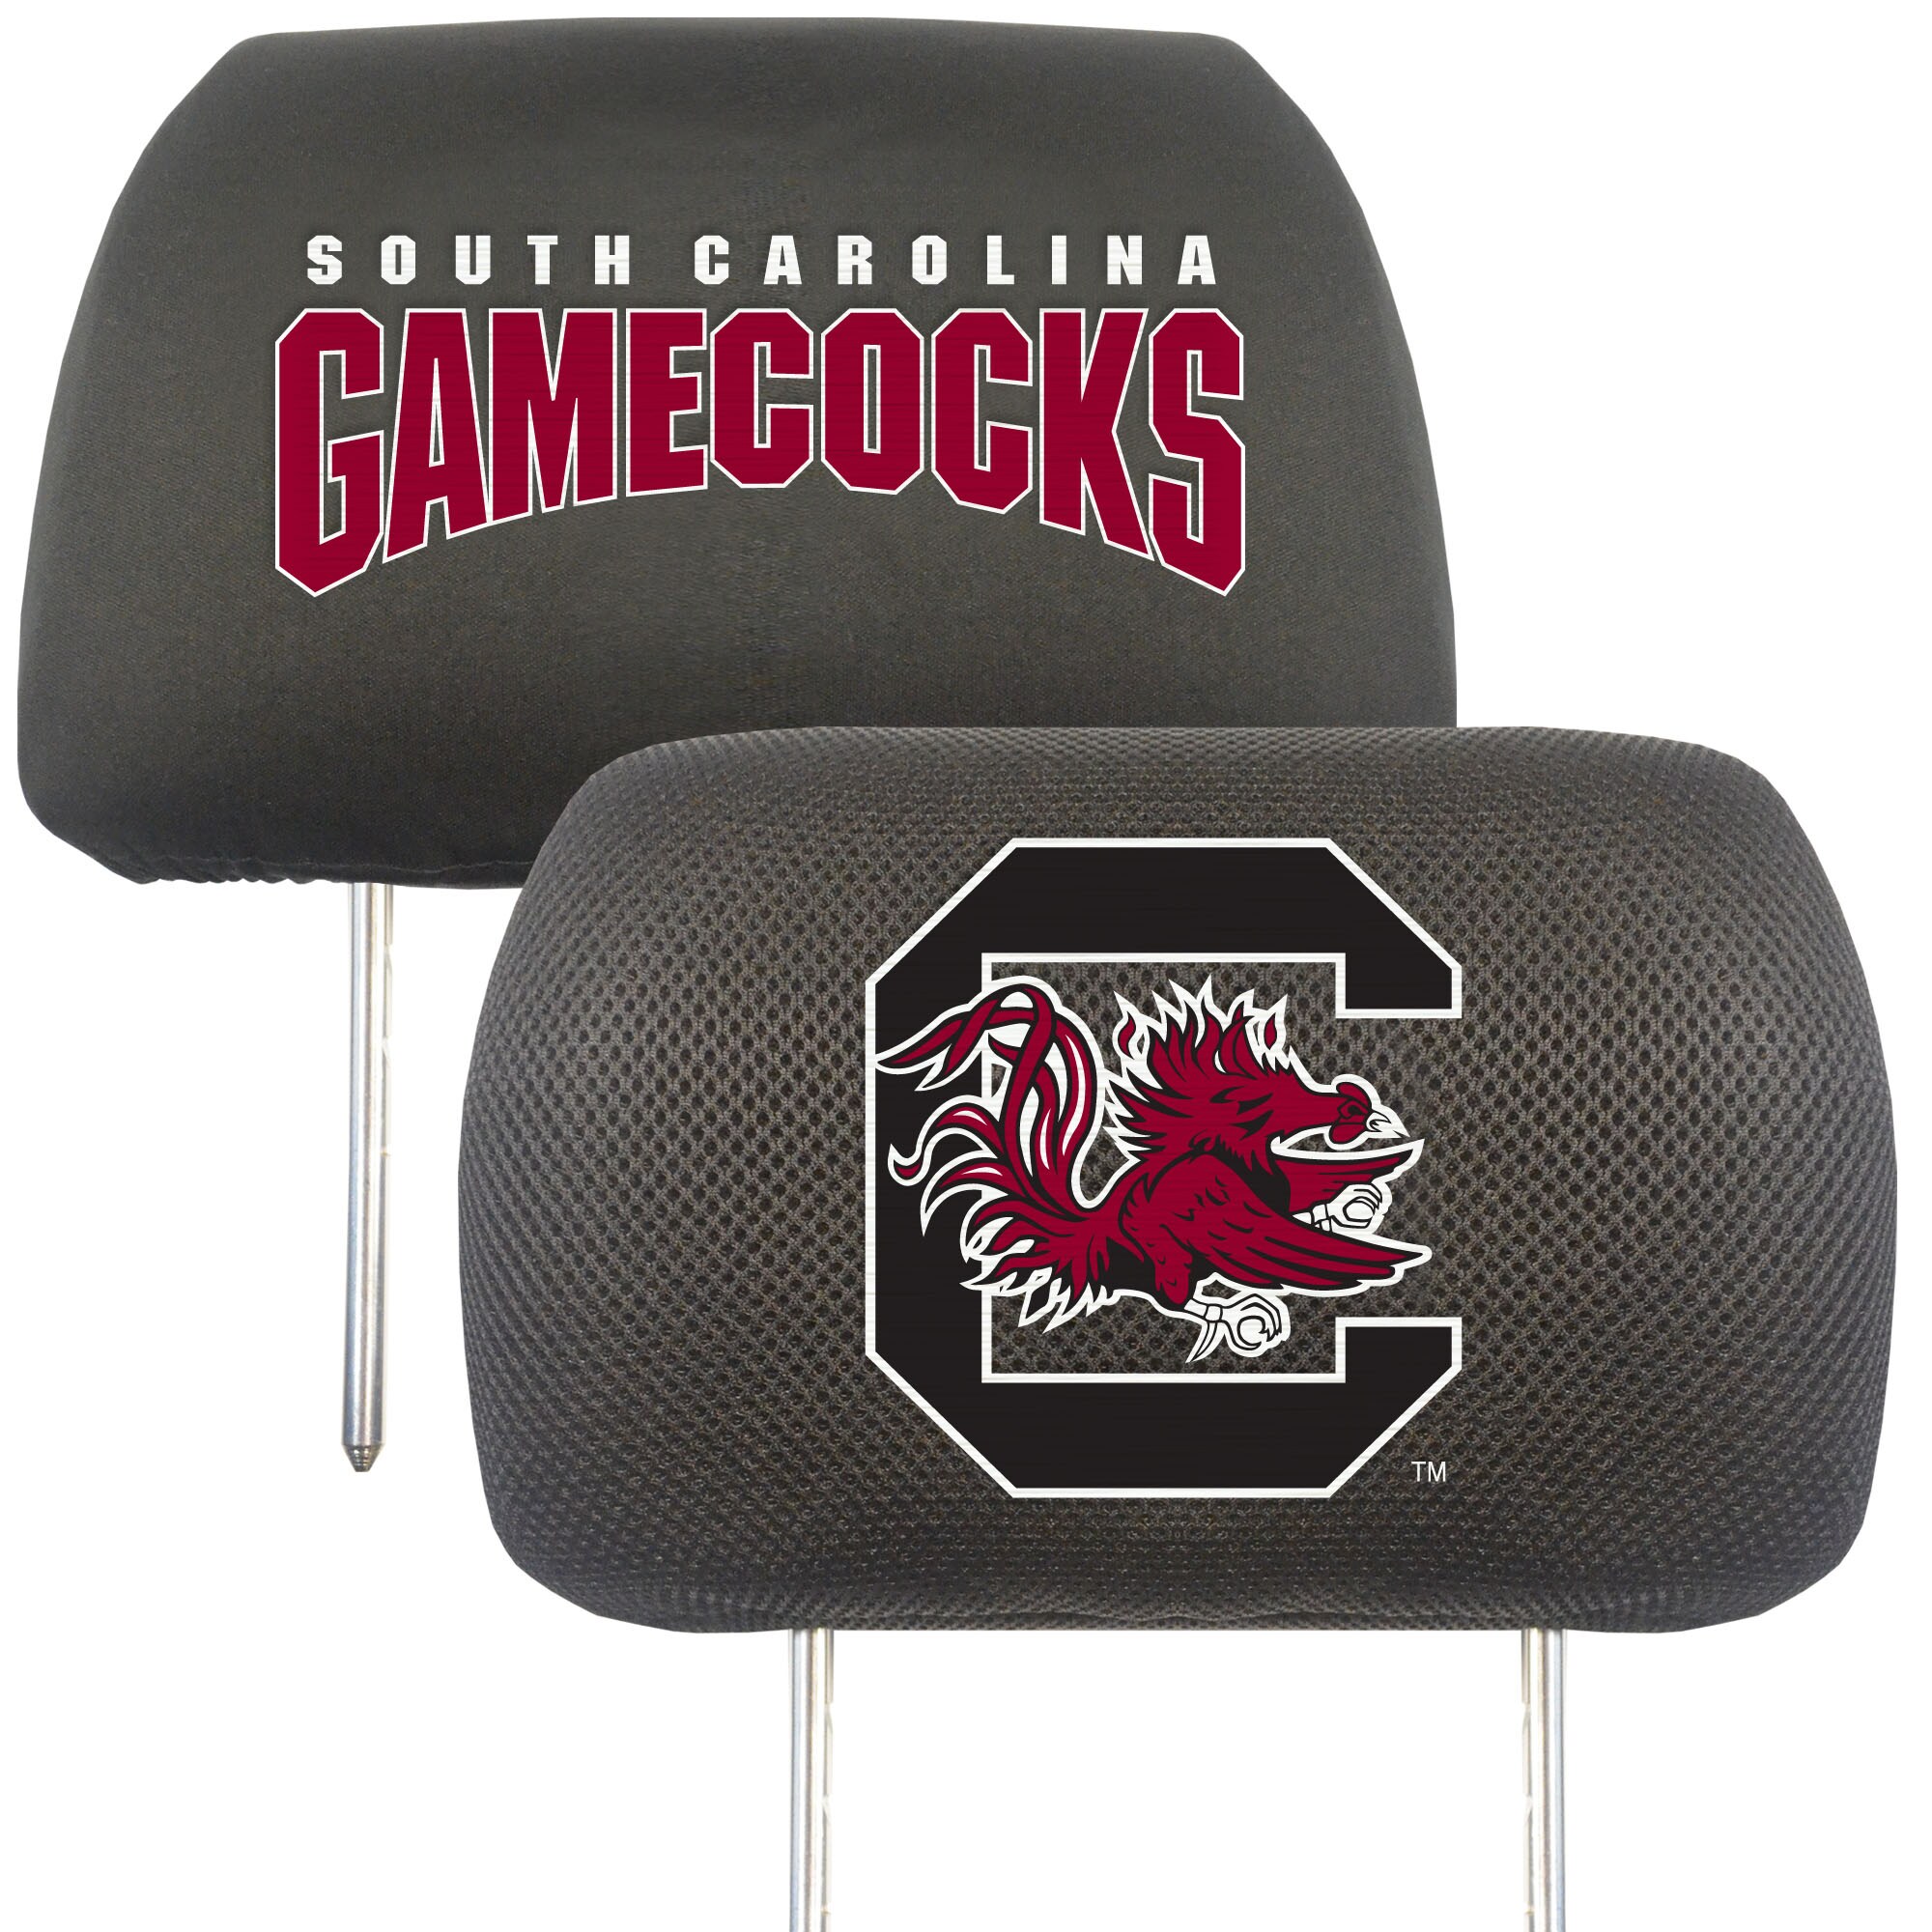 NCAA College Athletics Fan Shop Sports Team Merchandise South Carolina Fighting Gamecocks 3-D Trailer Hitch Cover 